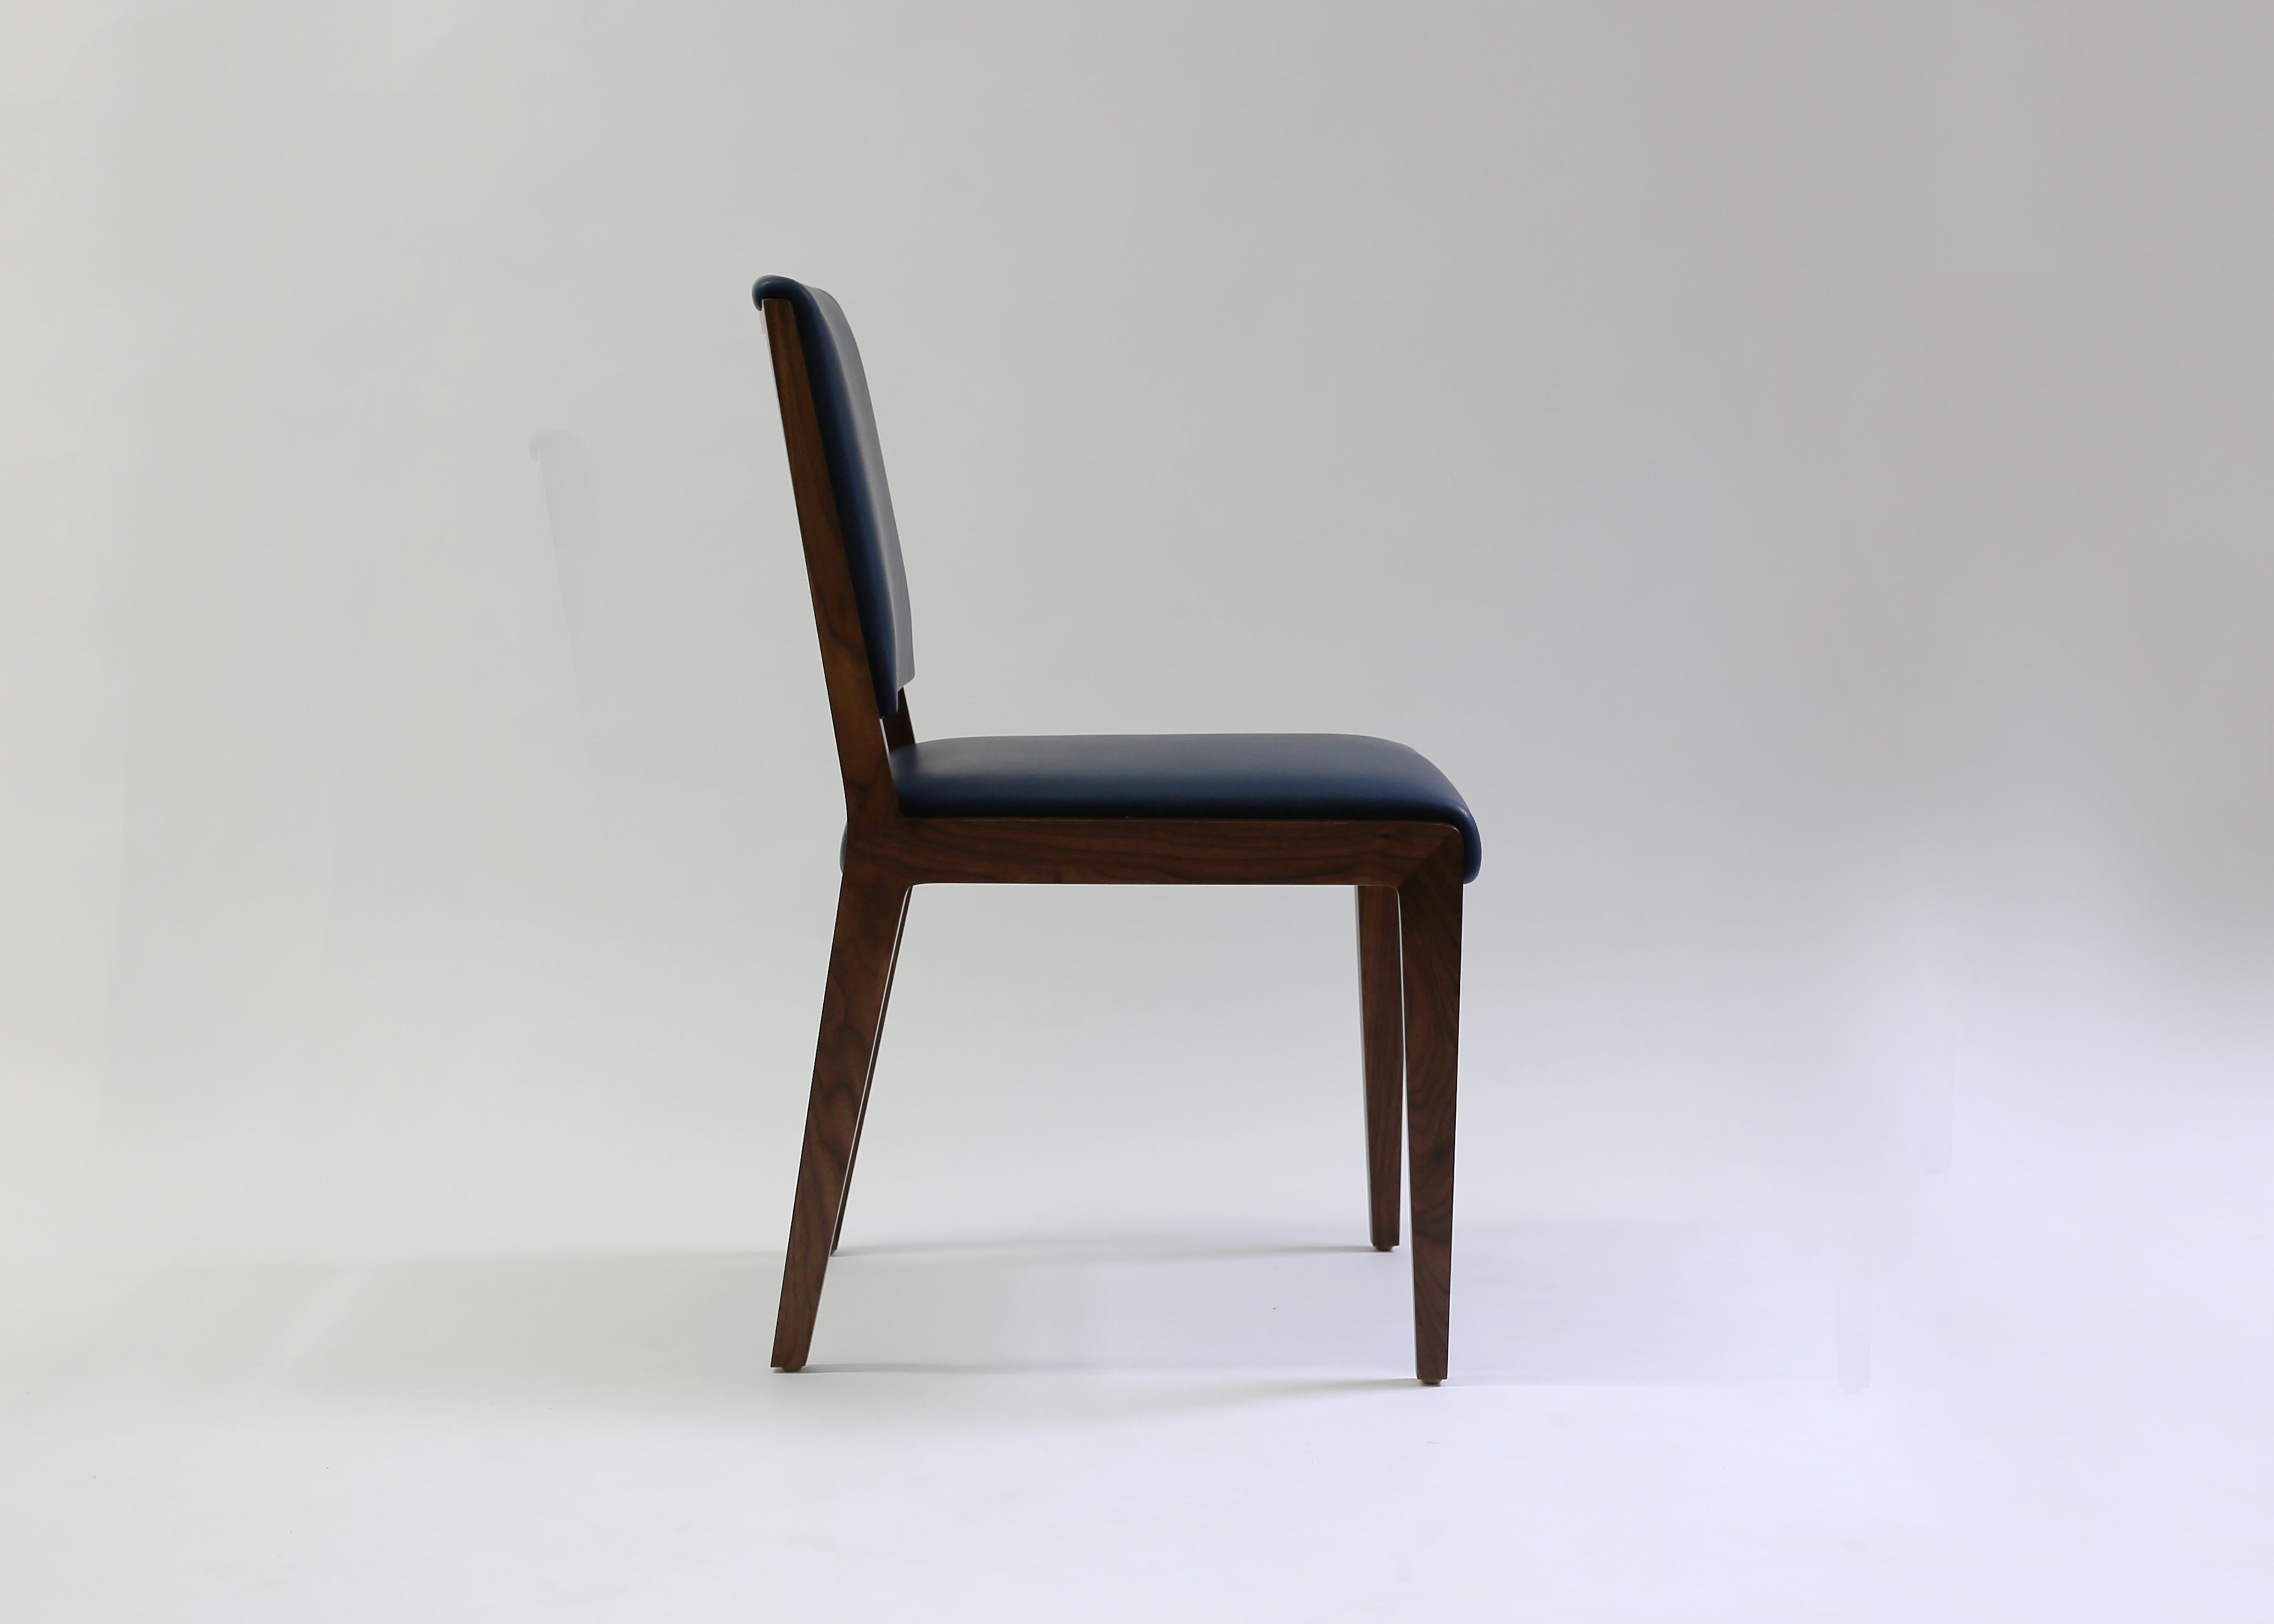 The Nevin dining chair from Lf upholstery is a comfortable and beautifully crafted side chair that can double as both a dining chair and game chair, shown in blue leather with soft foam on back and seat with hand-carved mahogany wood frame.
ITEM IS